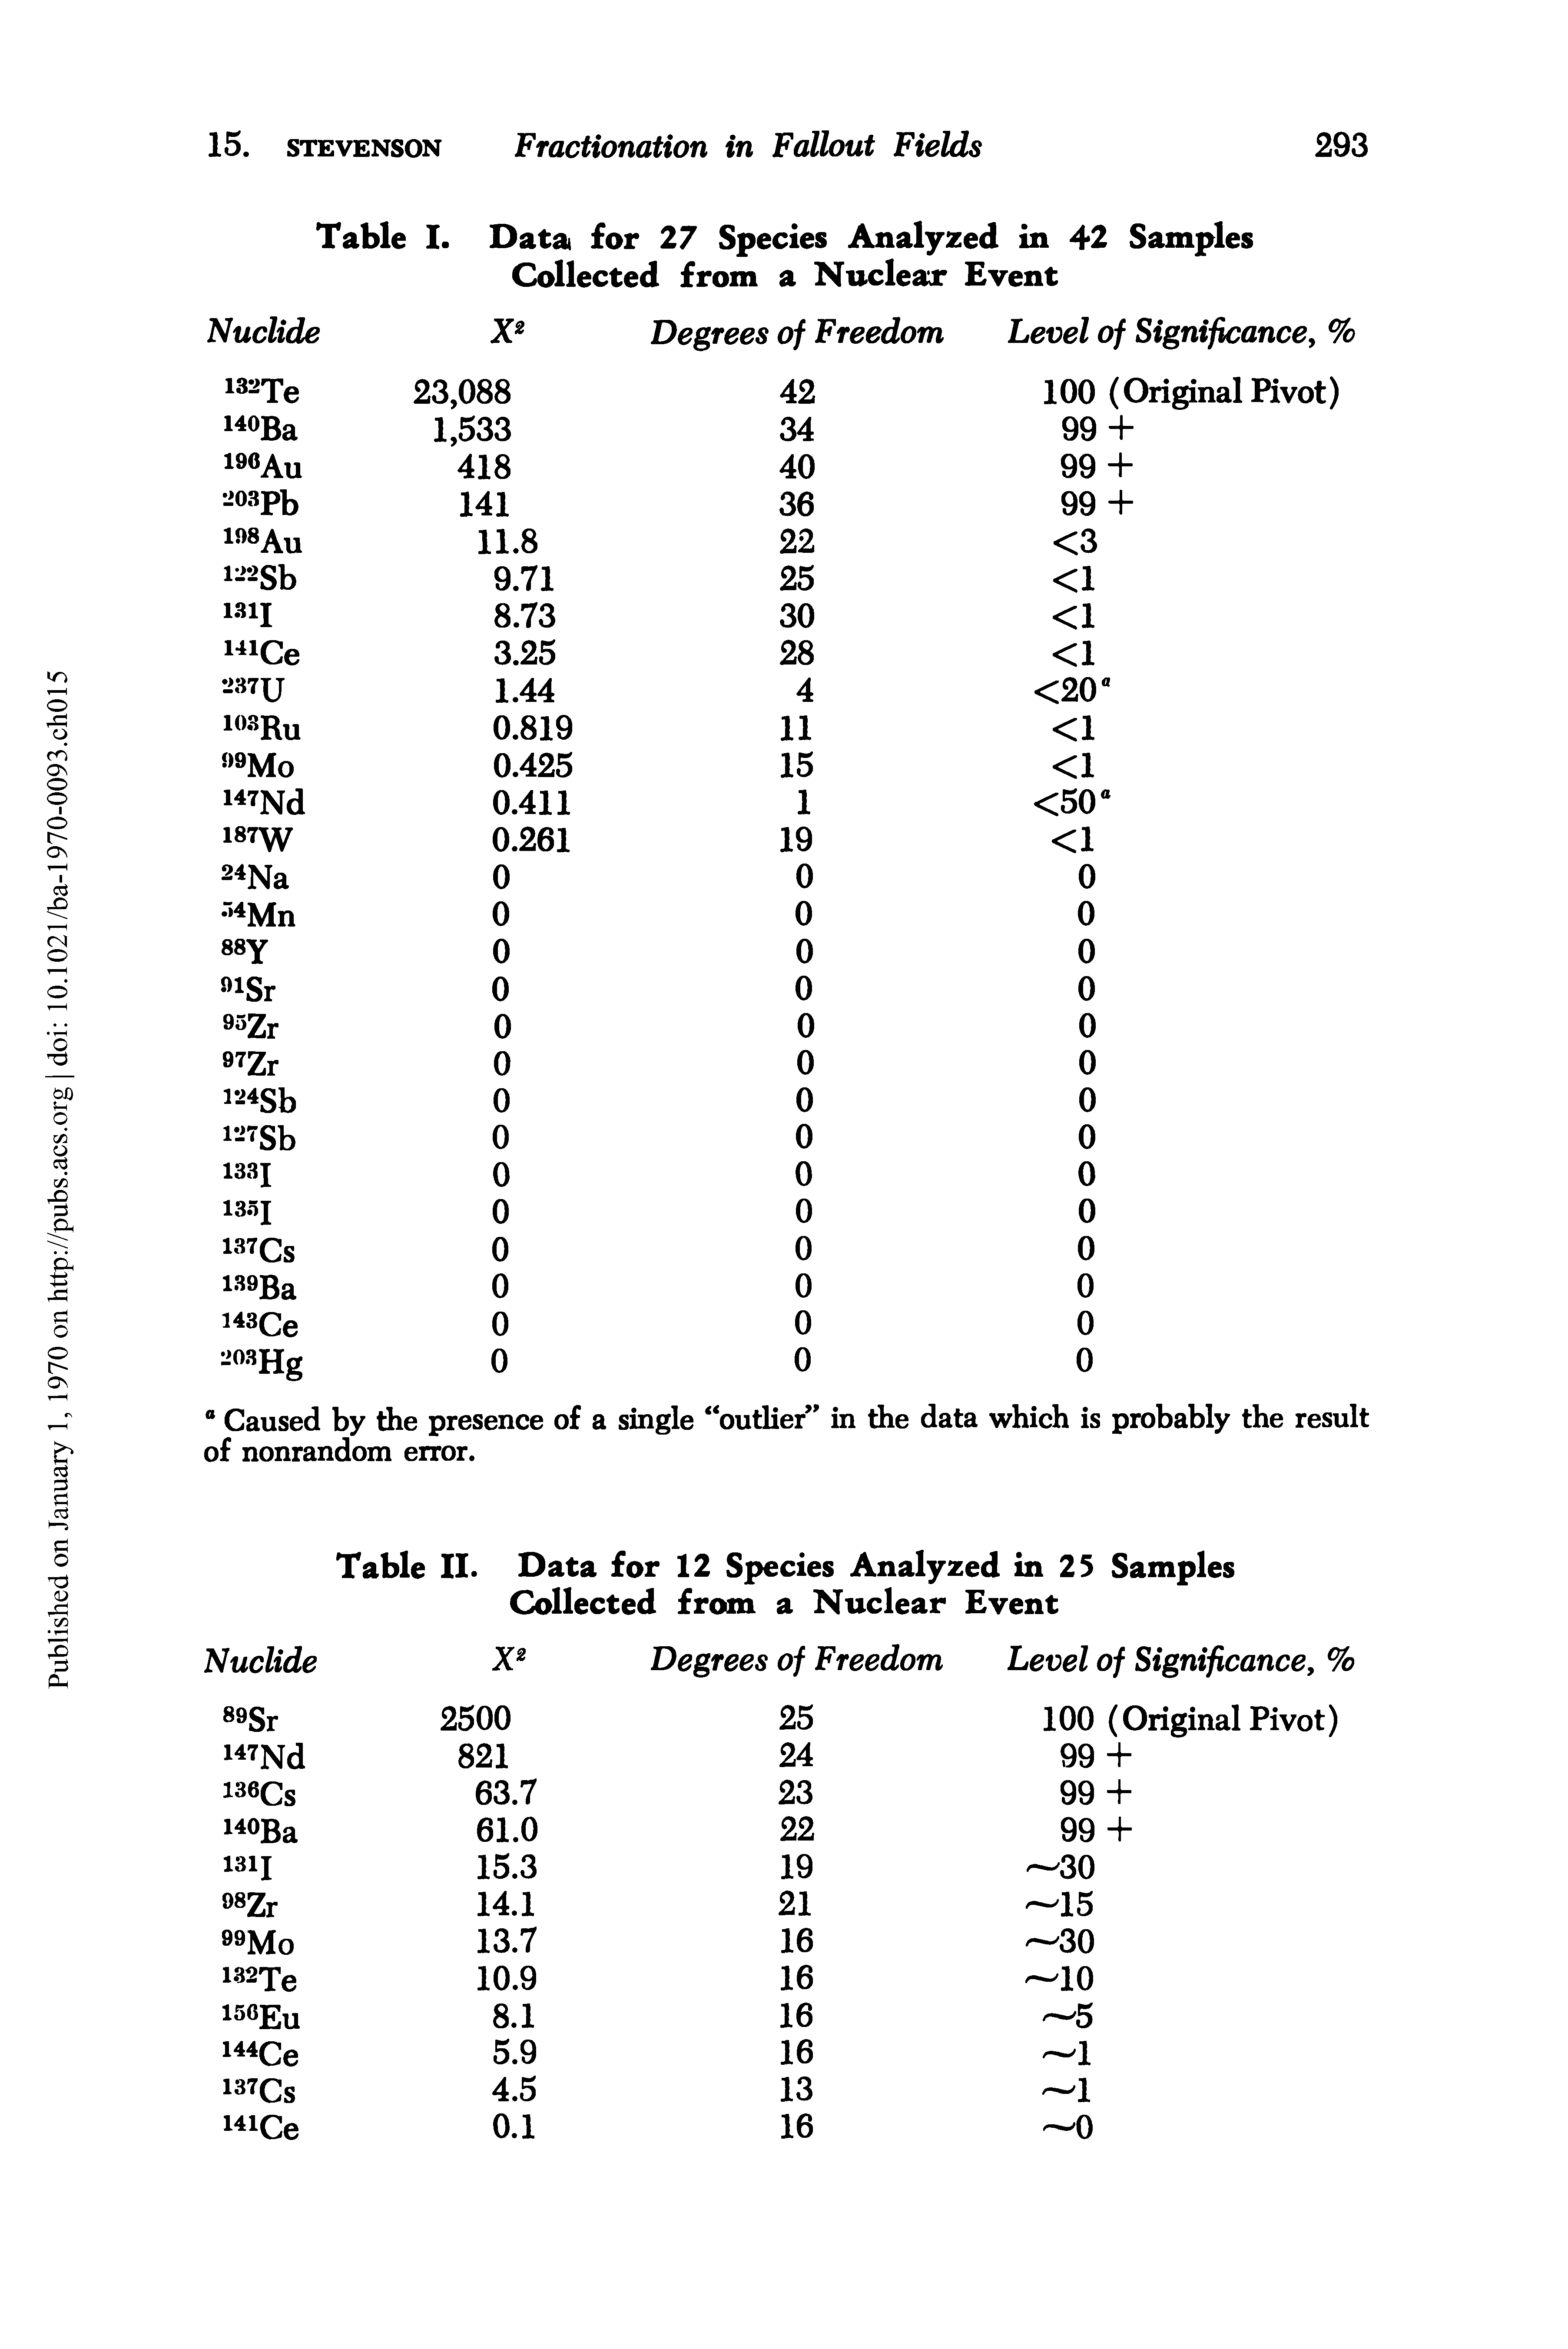 Table I. Data for 27 Species Analyzed in 42 Samples Collected from a Nuclear Event...